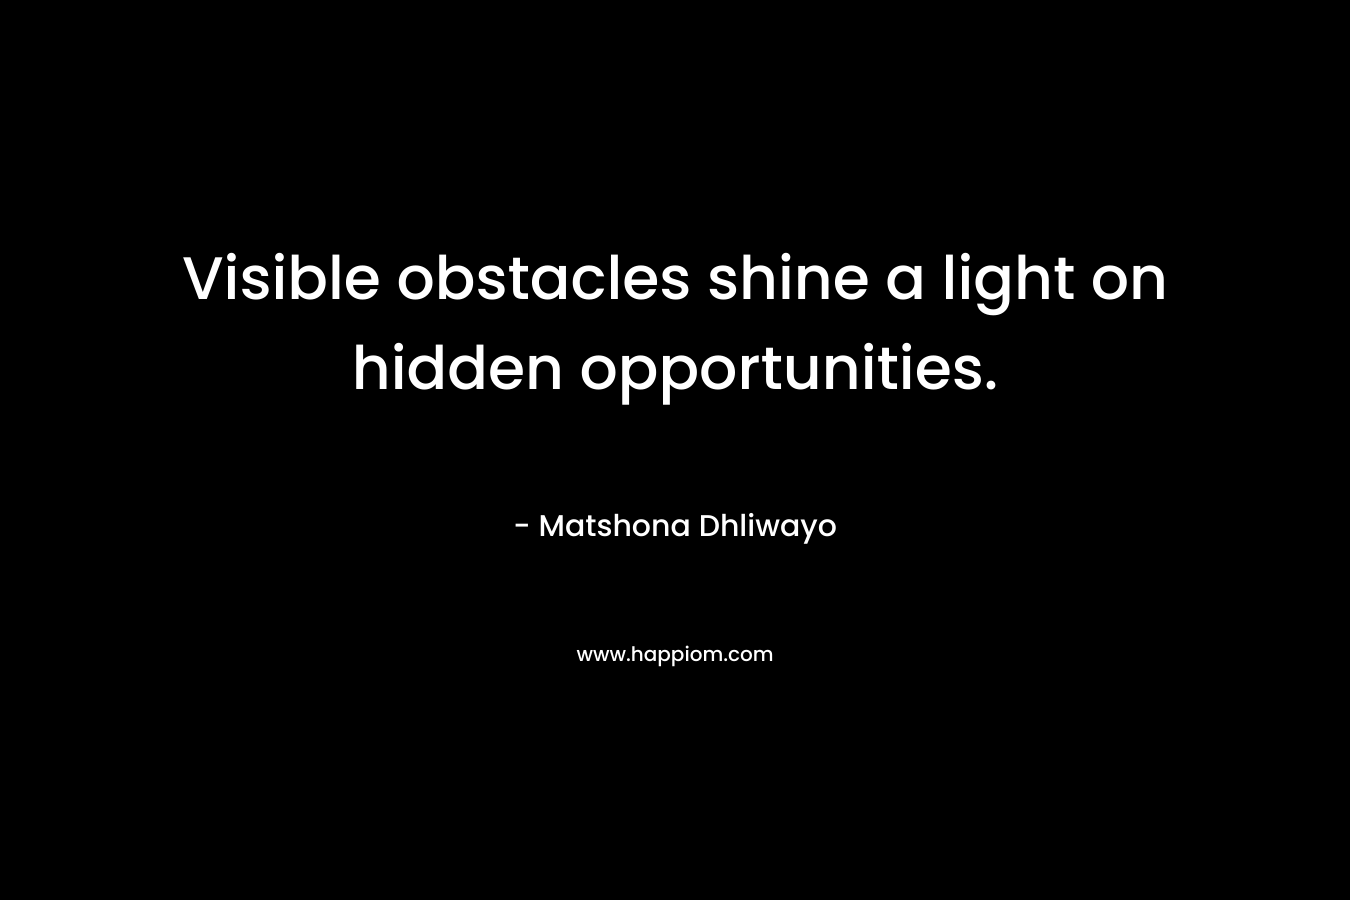 Visible obstacles shine a light on hidden opportunities.